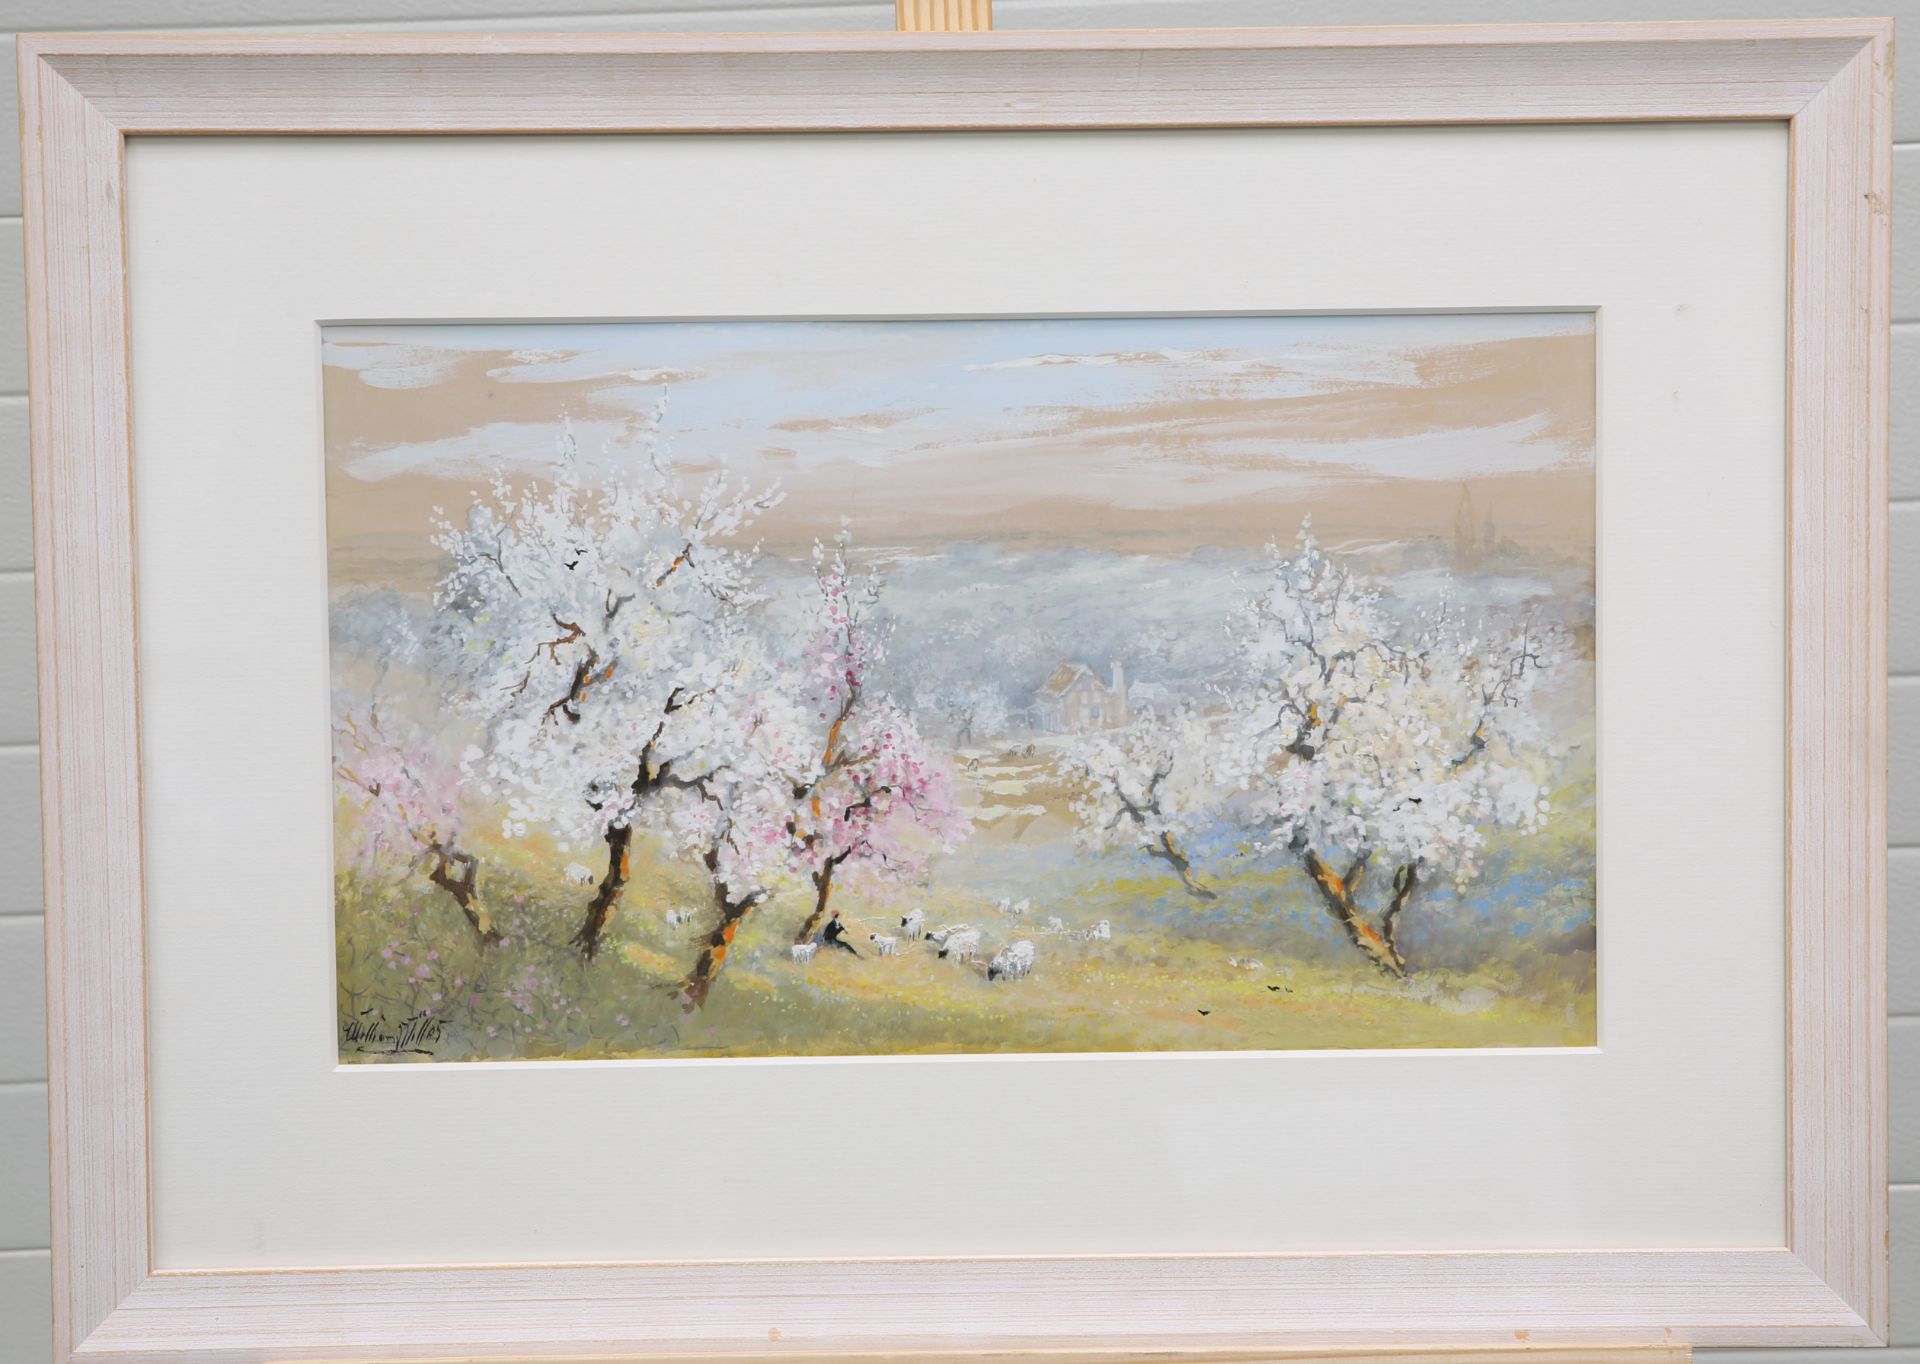 WILLIAM MILLER, SHEEP AND A FLAUTIST IN A BLOSSOM FILLED LANDSCAPE - Image 2 of 2